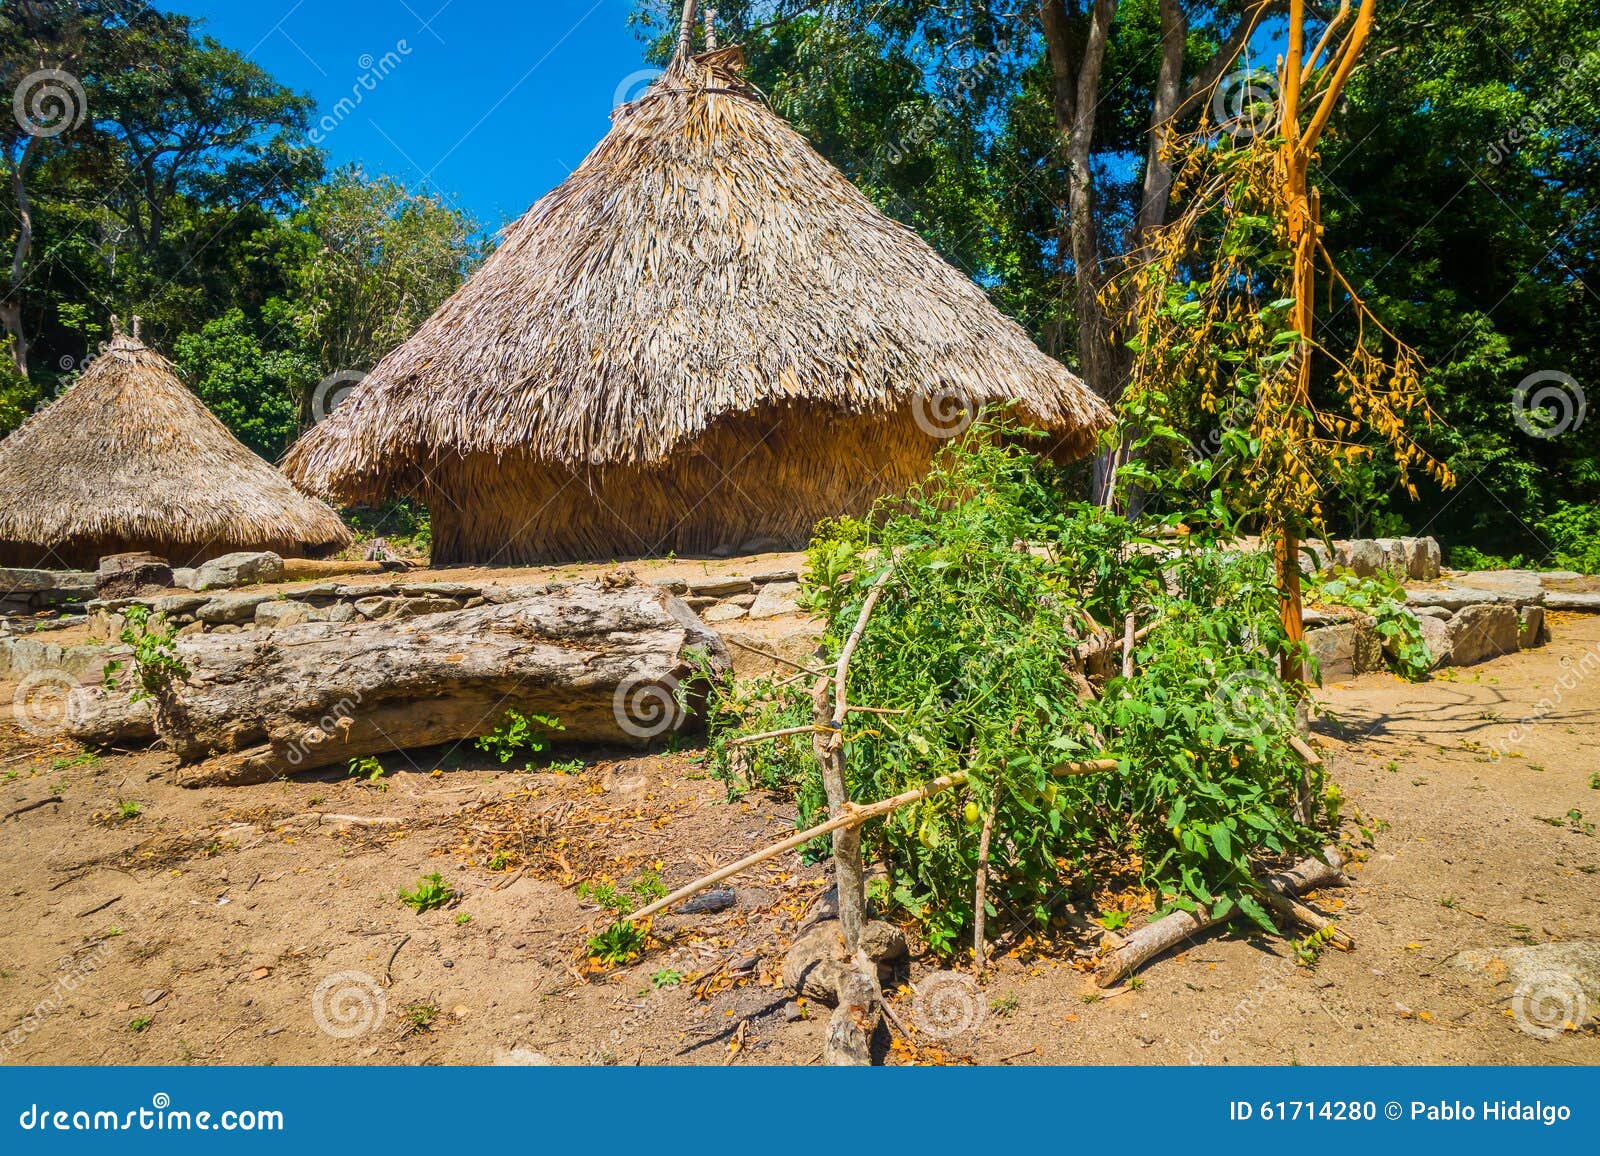 traditional house of kogi people, indigenous ethnic group, colombia